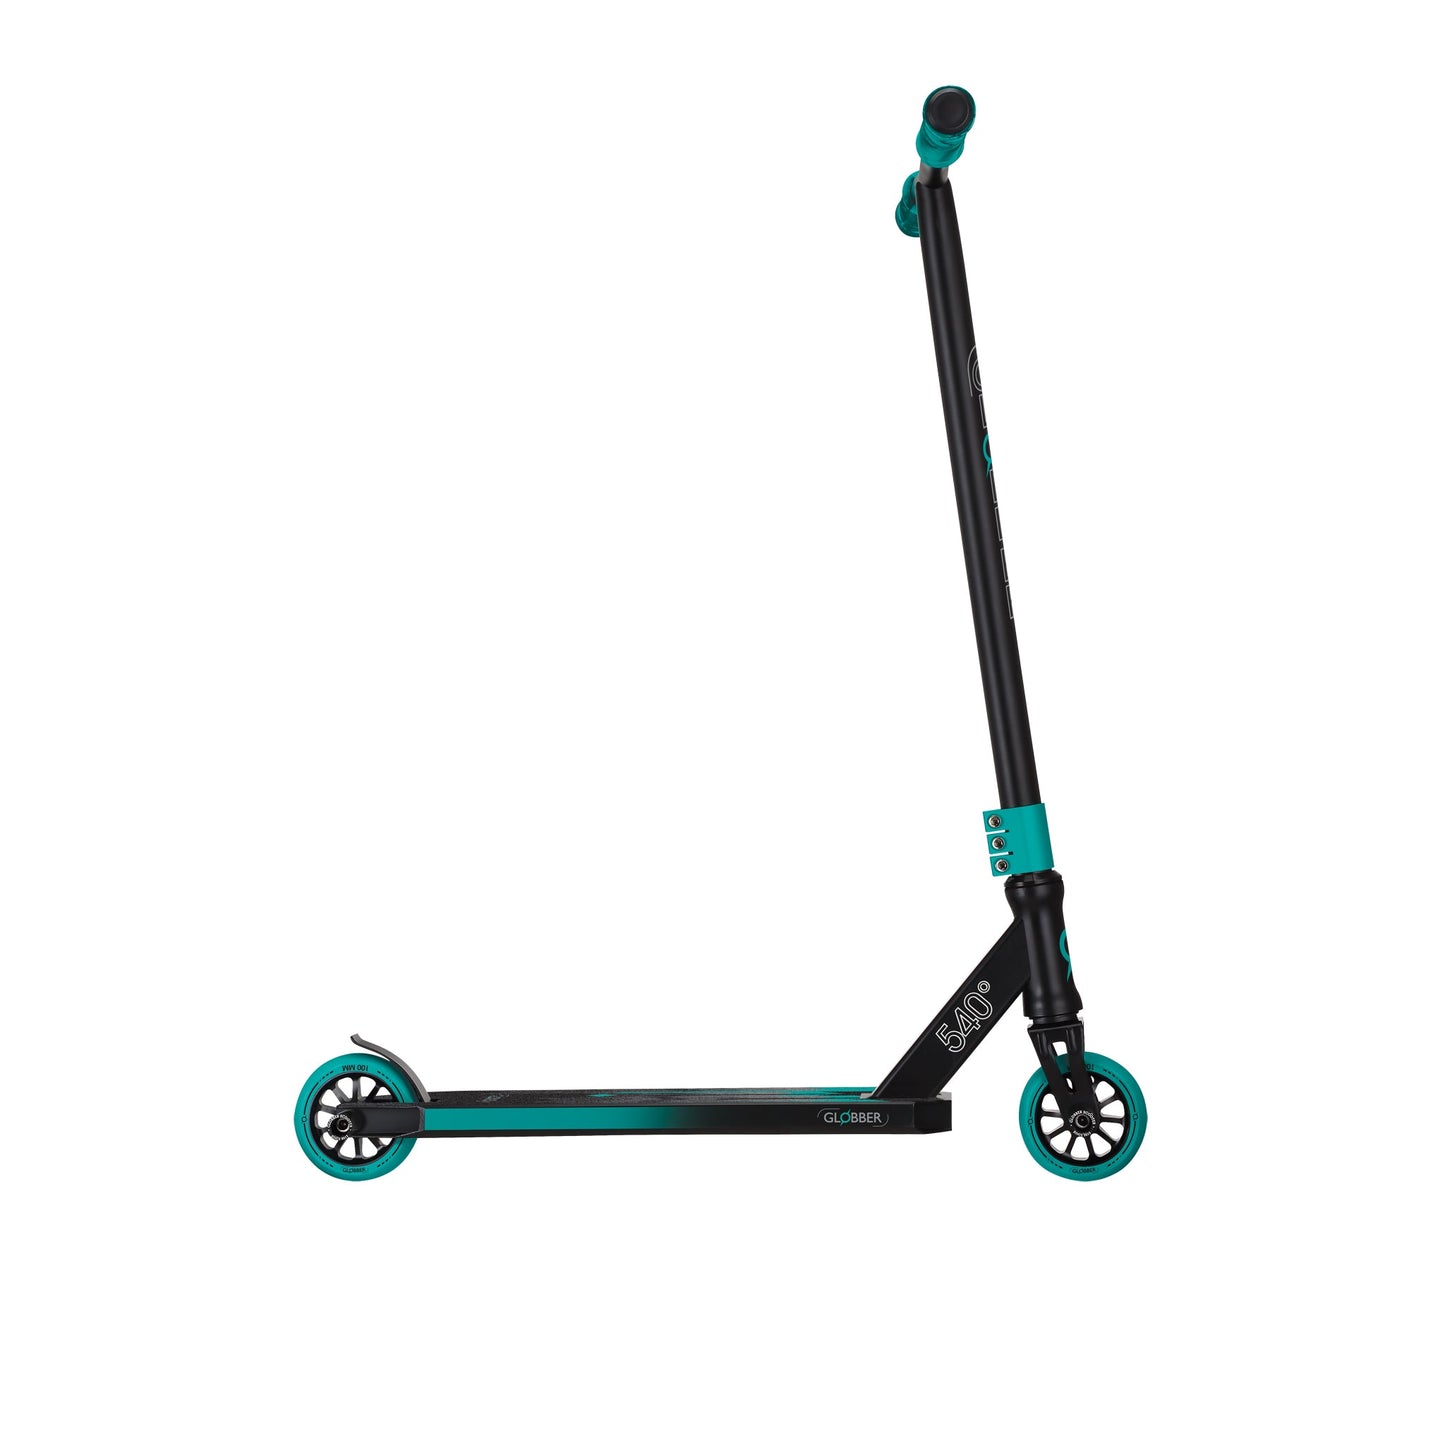 GS 540: Stunt Scooter for Intermediate Riders - Teal/Black